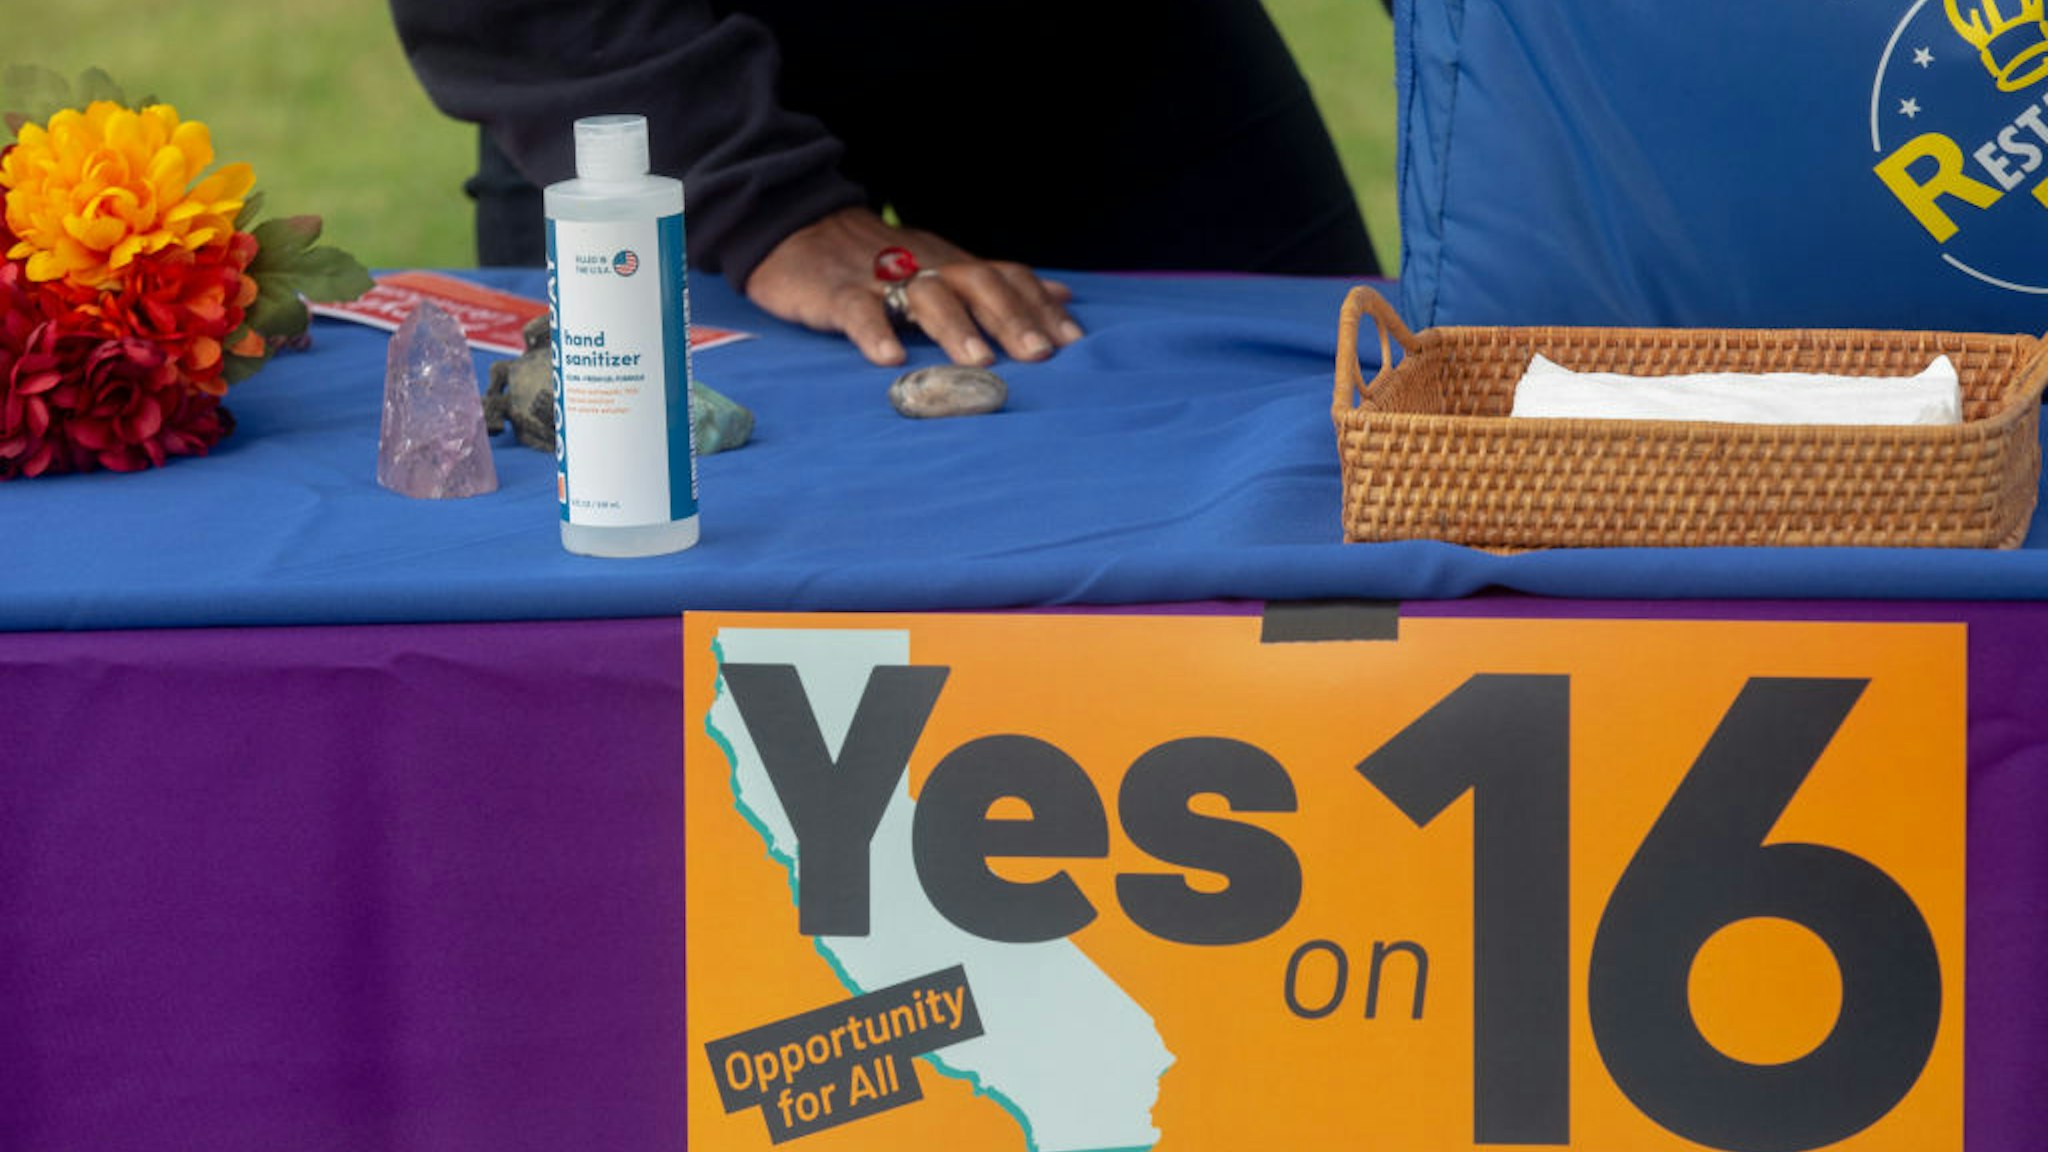 Supporters of Proposition 16 rally at Dorsey High School in Los Angeles to urge the community to vote yes on the proposition on Saturday, October 24, 2020, during early voting in California.